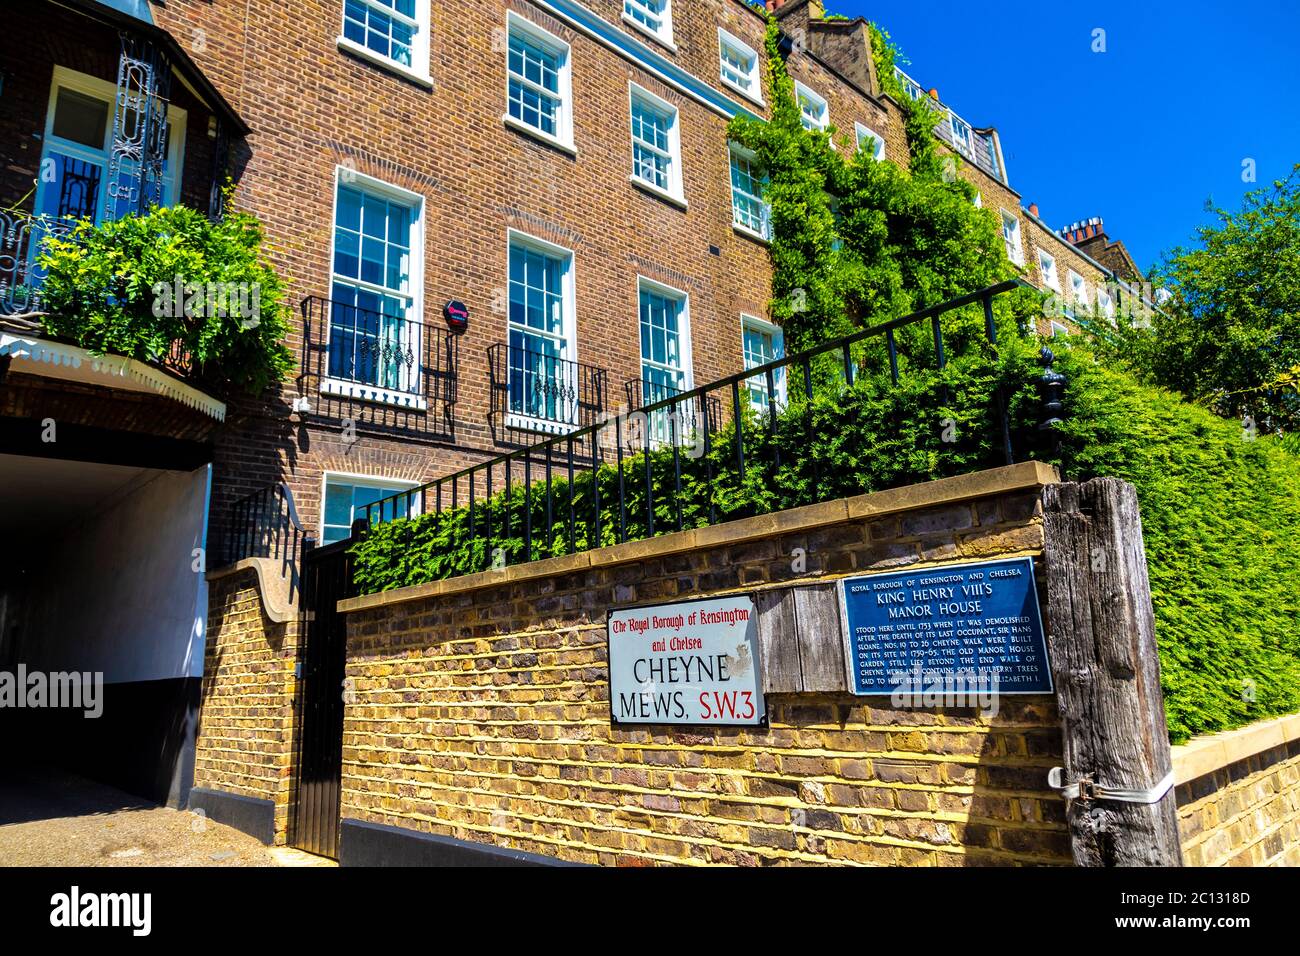 Blue plaque for King Henry VIII's Manor House, Kensington and Chelsea, London, UK Stock Photo